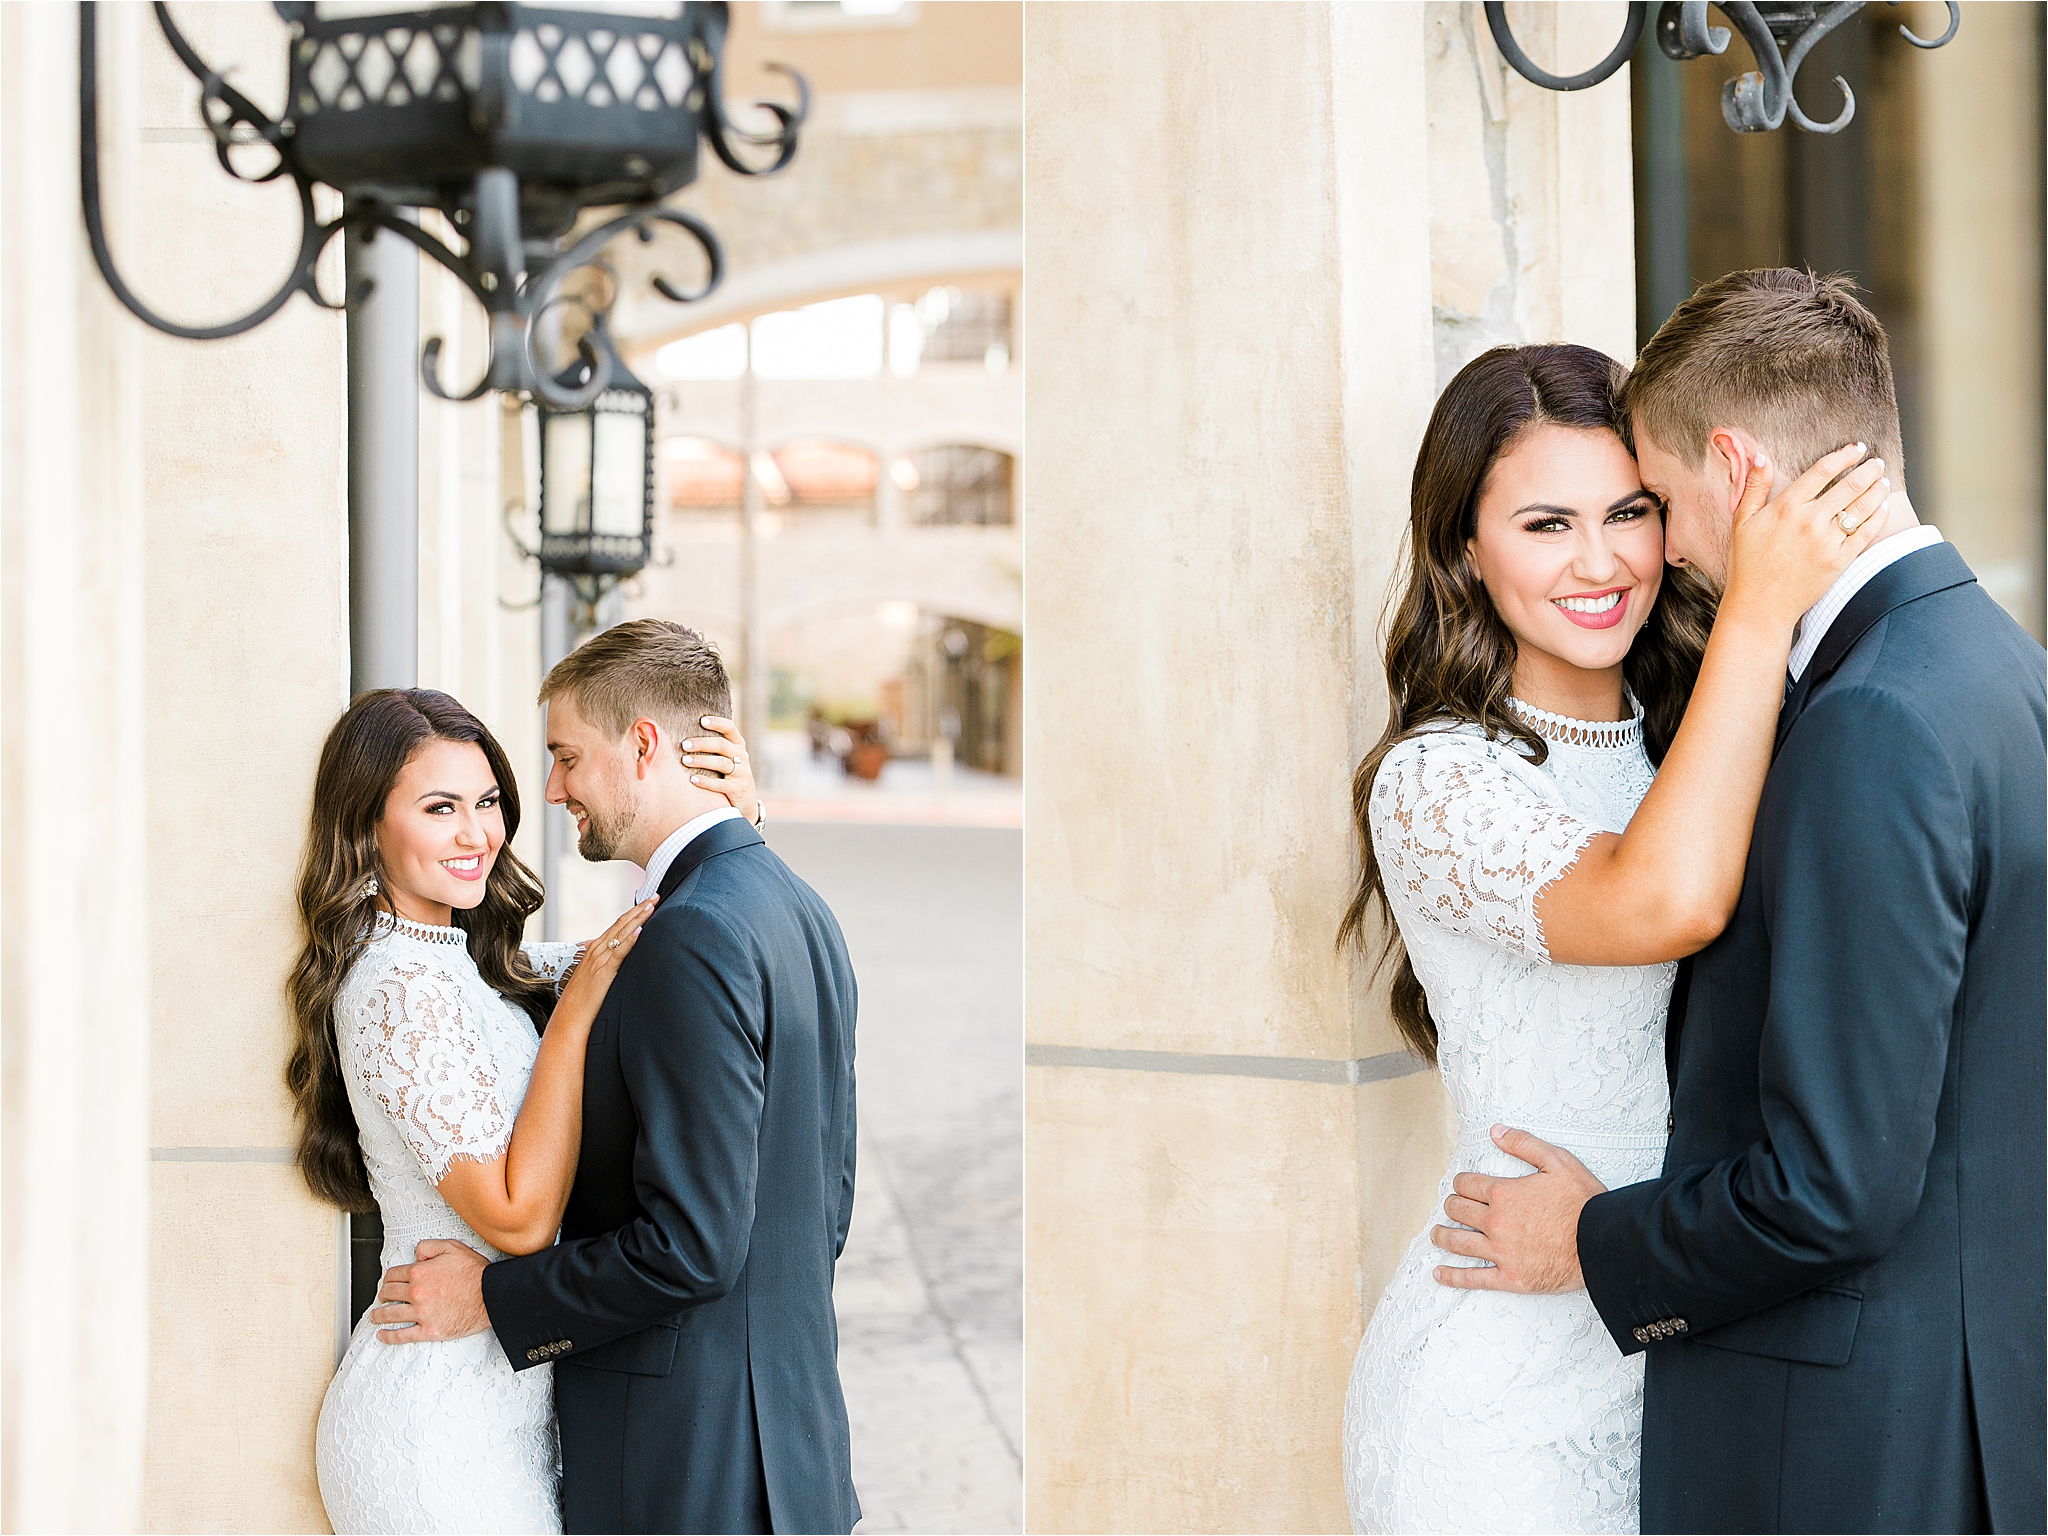 A bride to be with long, brown wavy hair pulls her fiance in close and smiles at the camera on the streets of adriatica village in McKinney, Texas by Dallas Engagement Photographer Jillian Hogan 